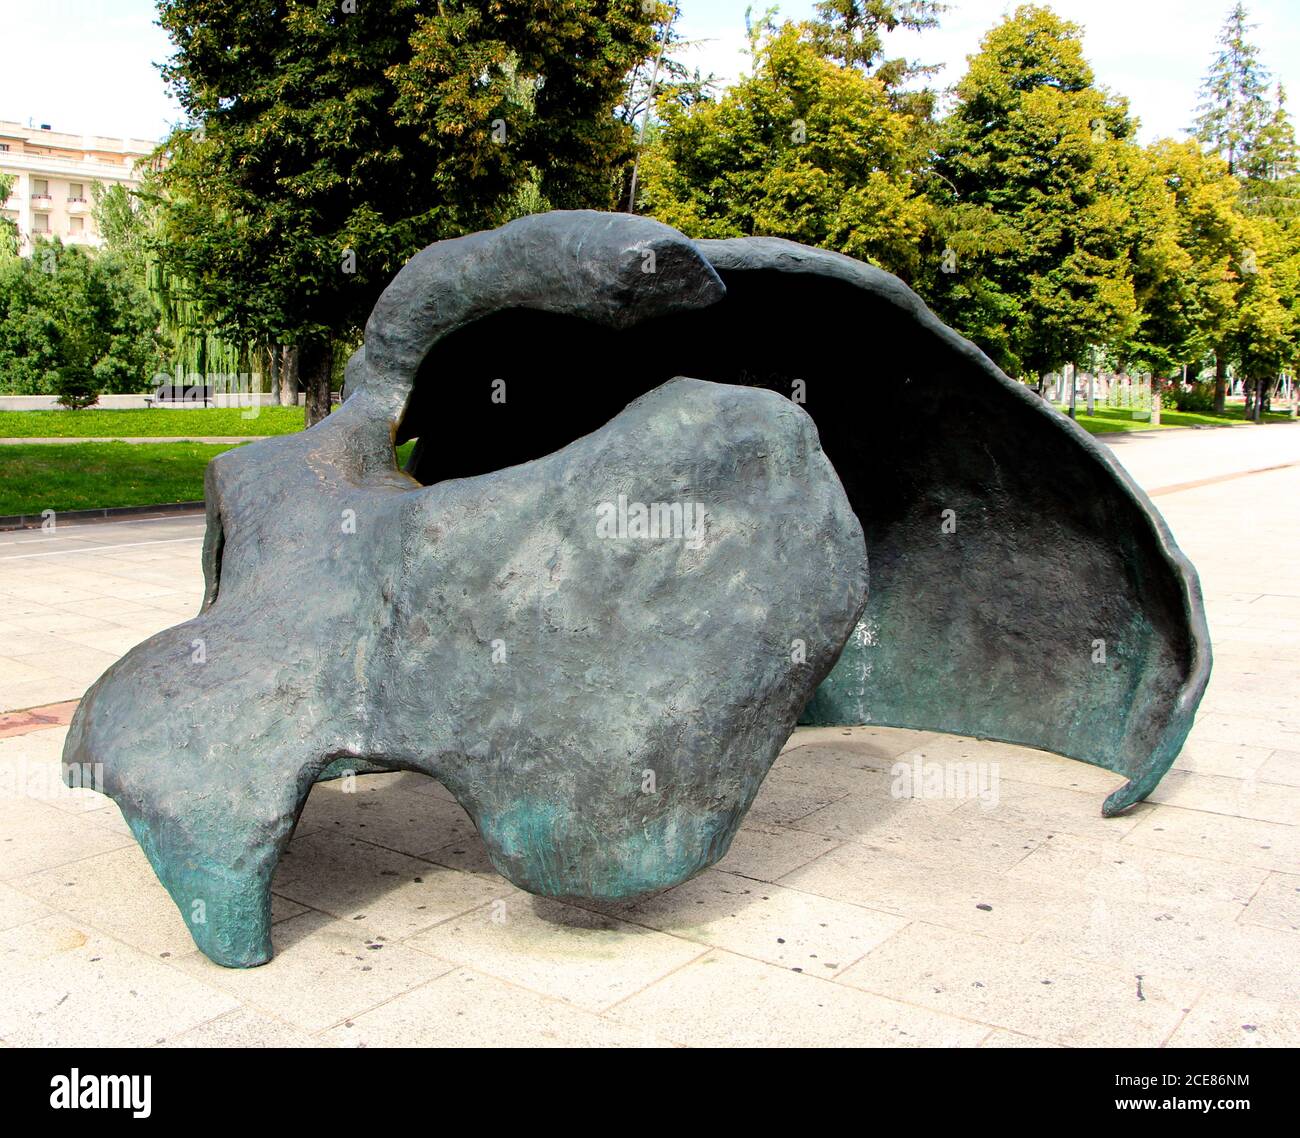 Partial large human skull bronze sculpture by Jose Muro outside the Forum Evolution museum Burgos Castile and Leon Spain Stock Photo